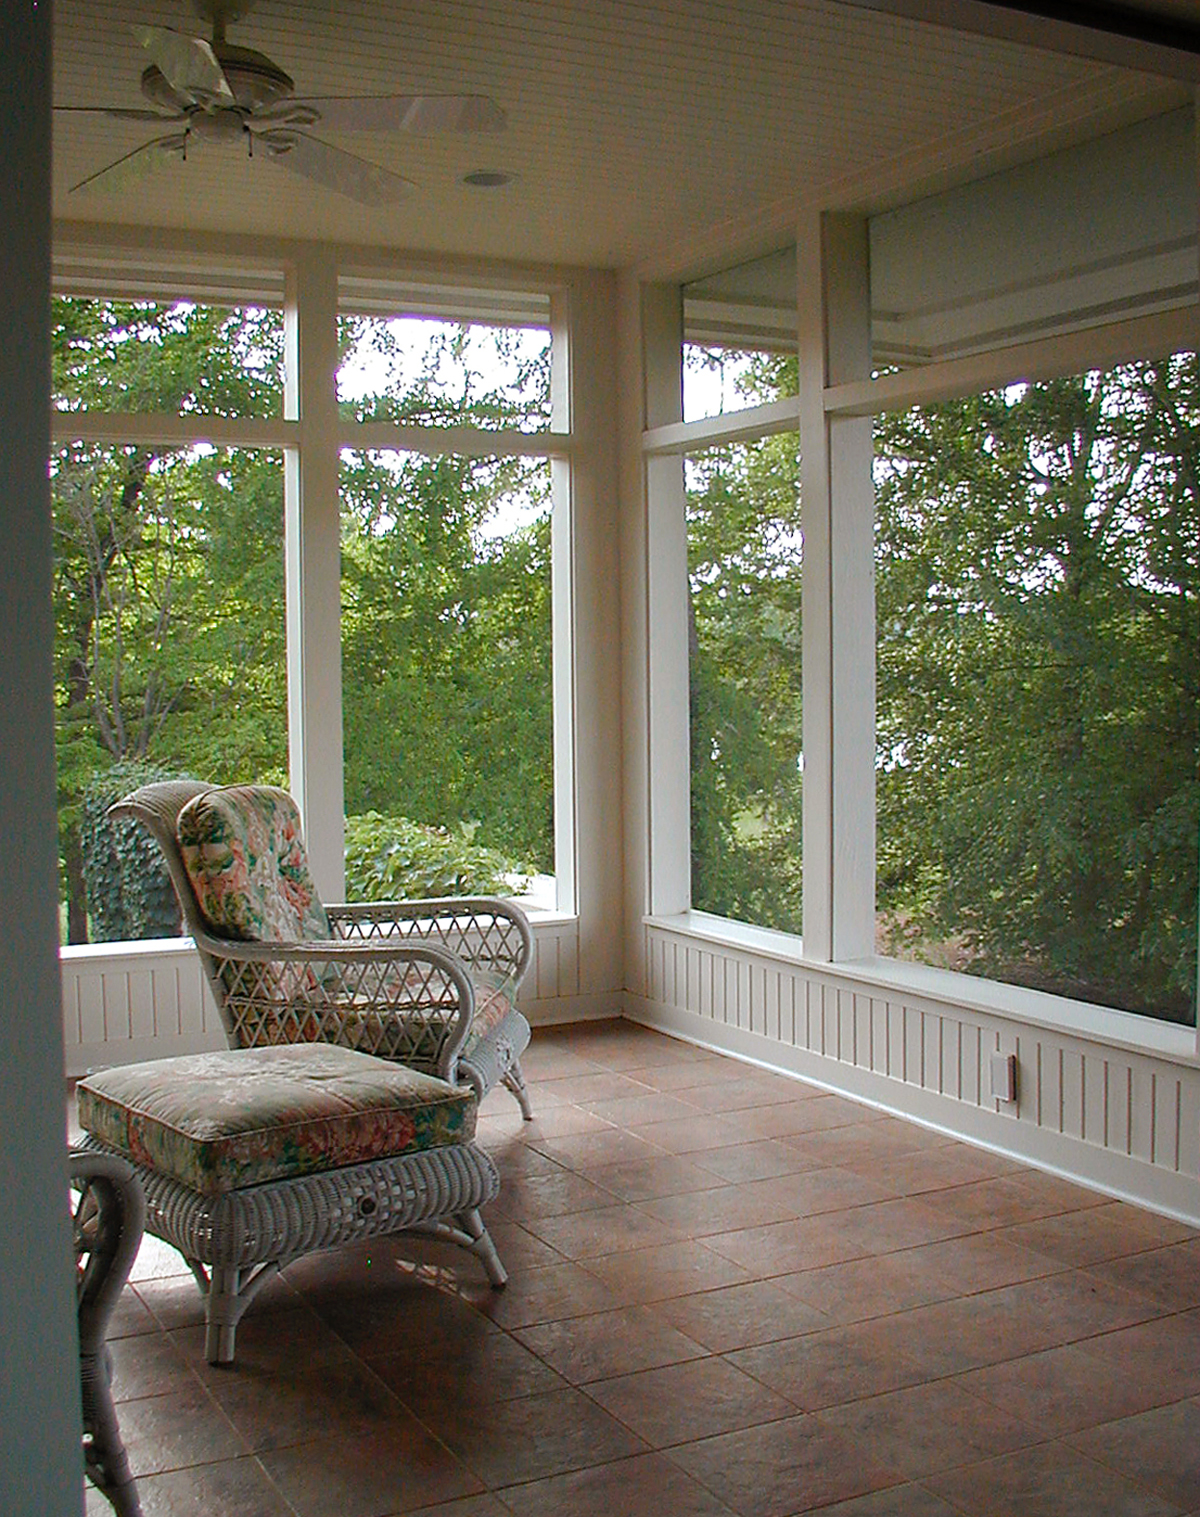 A simple and elegant screened porch with tile floors and a cozy armchair overlooking the wooded surroundings.